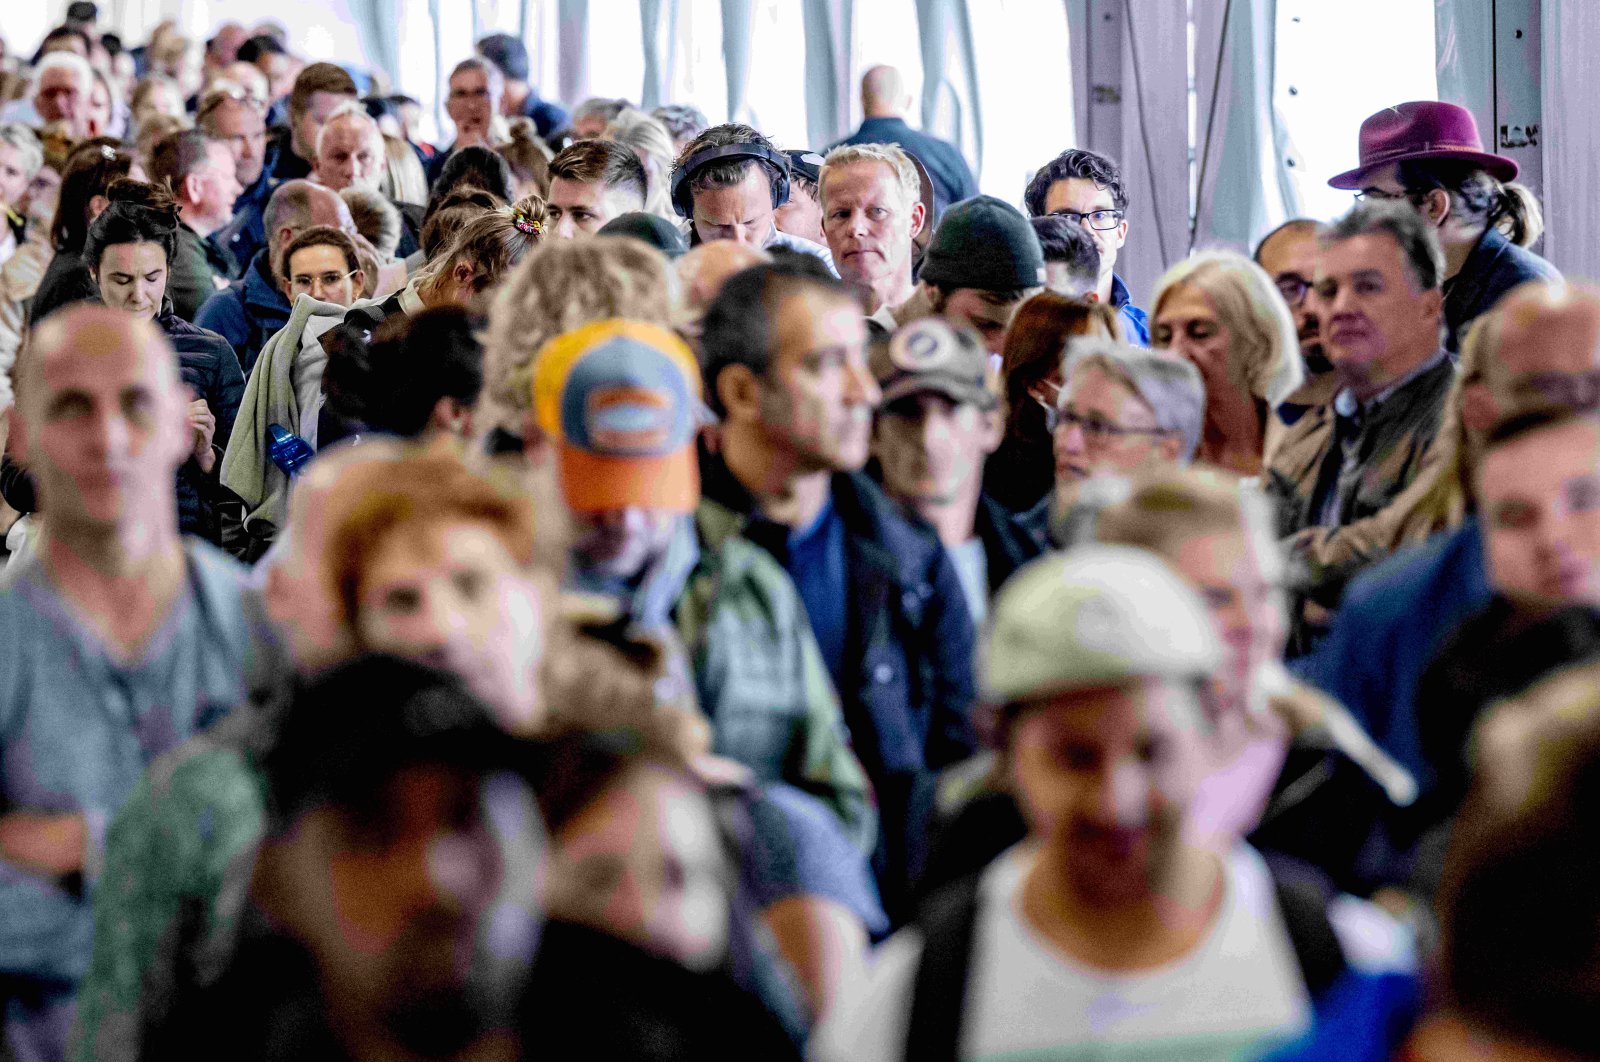 Crowds at Schiphol airport, travelers stand in long lines for security, in Amsterdam, Netherlands, on Oct. 3, 2022. (Reuters File Photo)